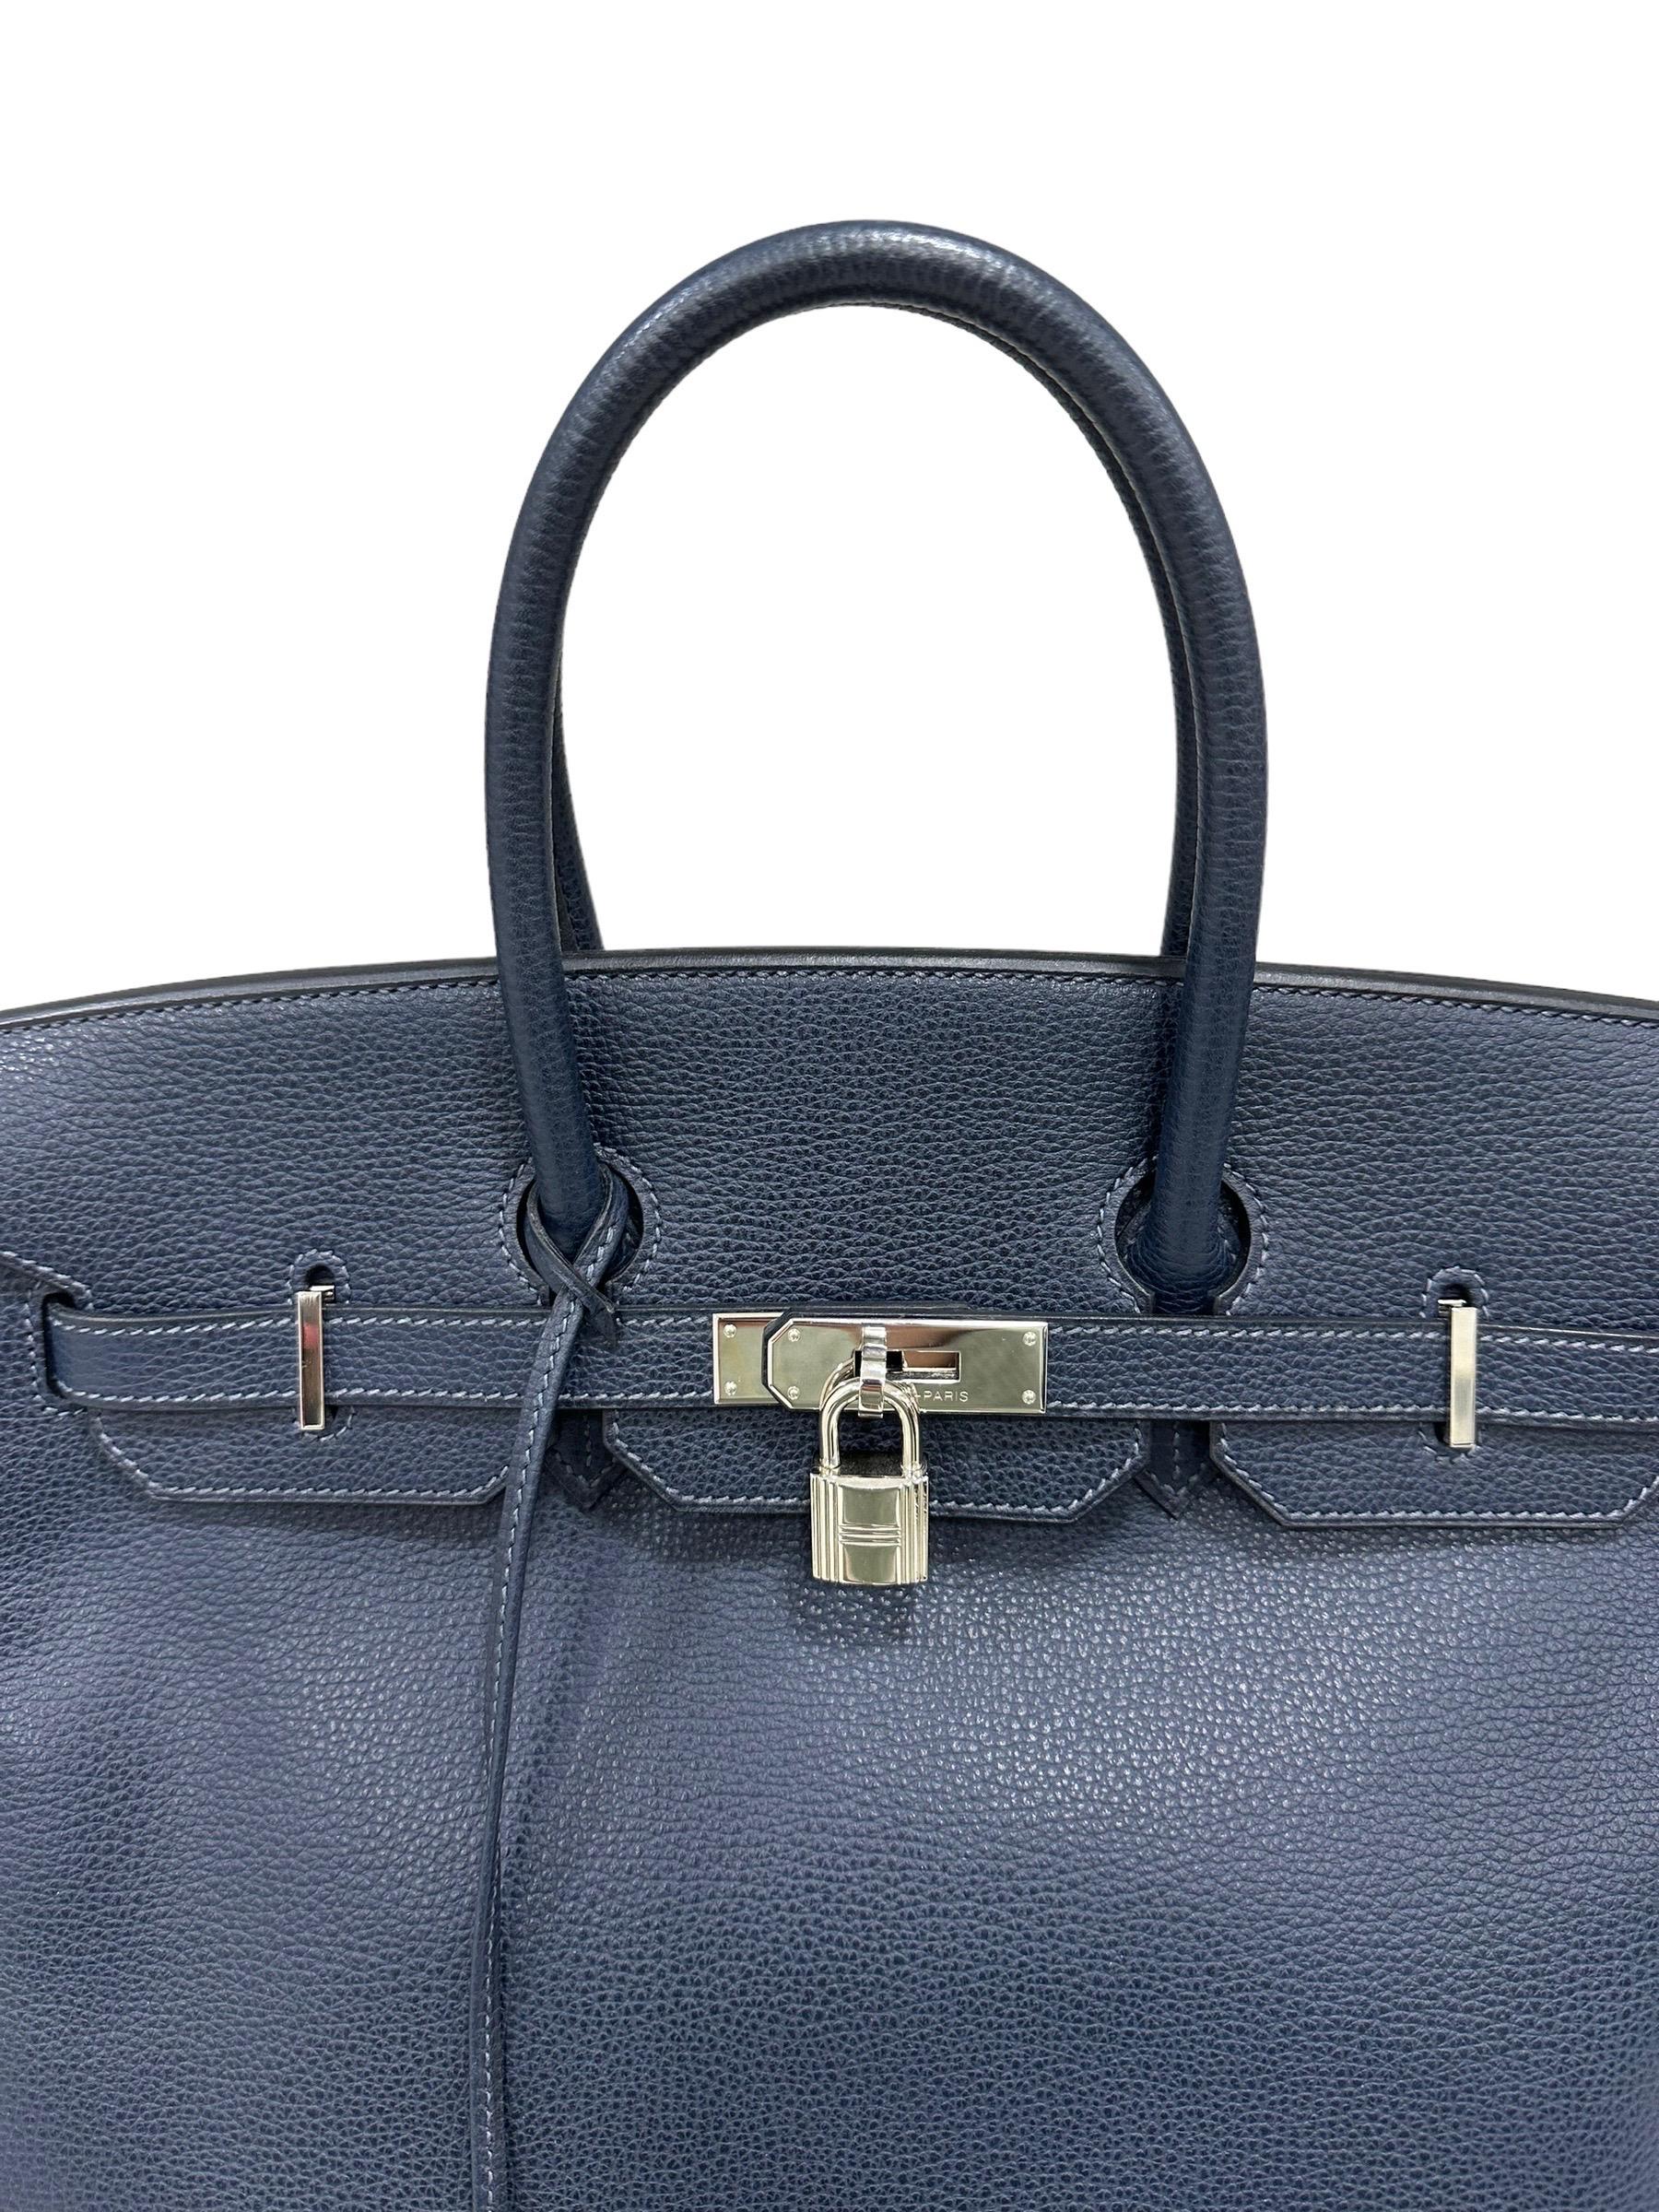 Hermès handbag, Birkin model, size 35, made in Bleu Abysse color Epsom leather with silver hardware. Equipped with the classic flap with interlocking closure with horizontal band, padlock and keys. Equipped with double rigid hand handle and internal